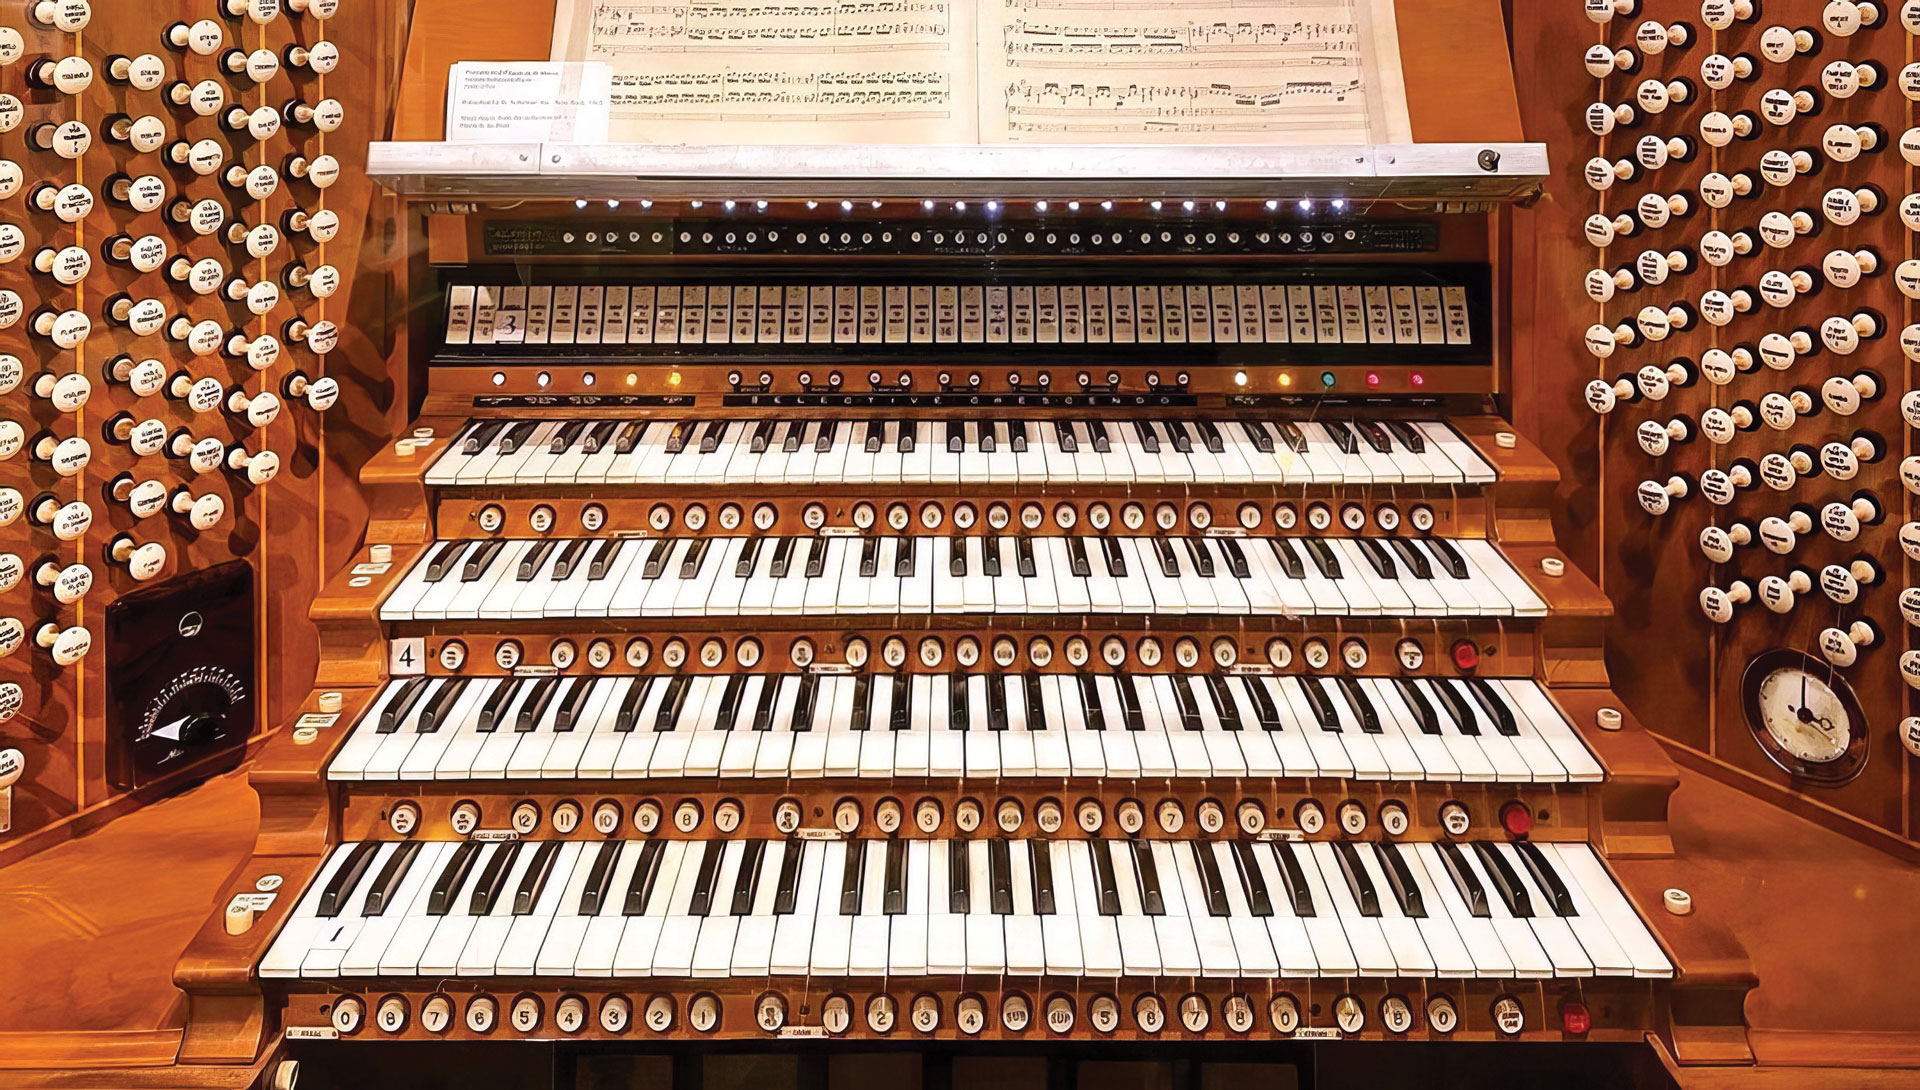 Close-up image of an organ with sheet music and all of the repeating keys and buttons.